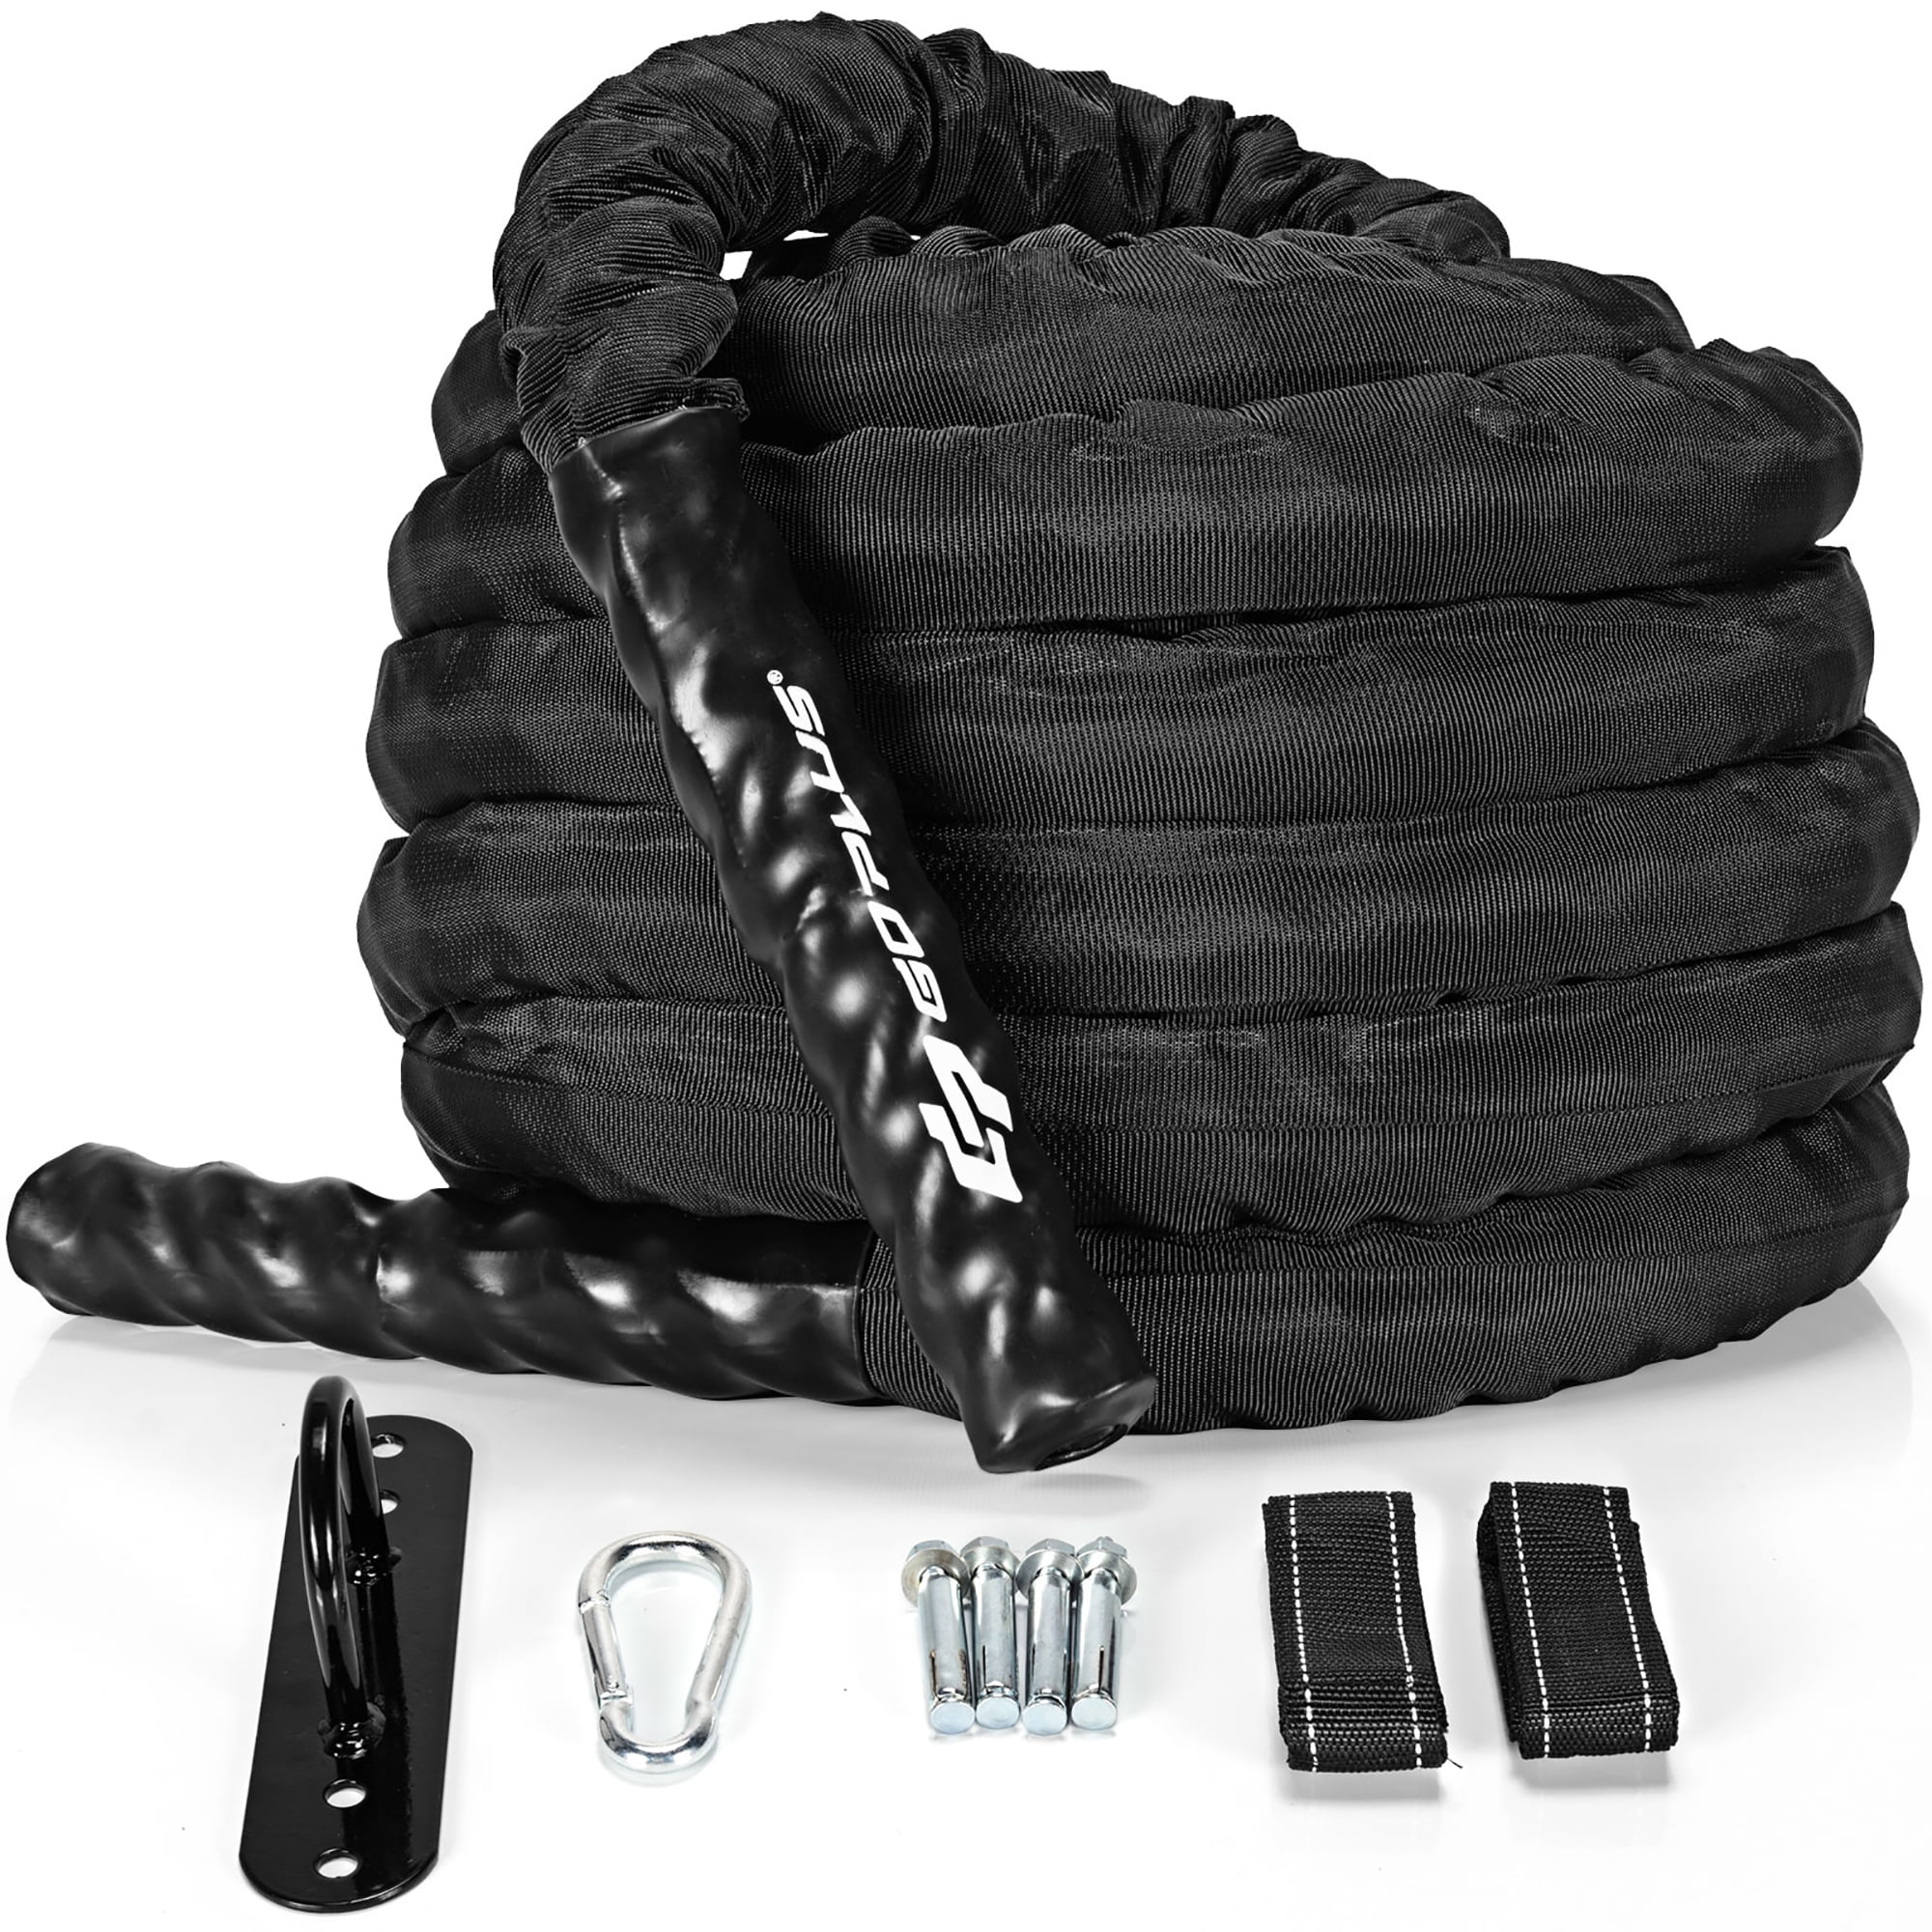 12 m Gym Battle Rope 35 mm Diameter Heavy Duty Exercise Rope w/ Anchor Strap Kit 